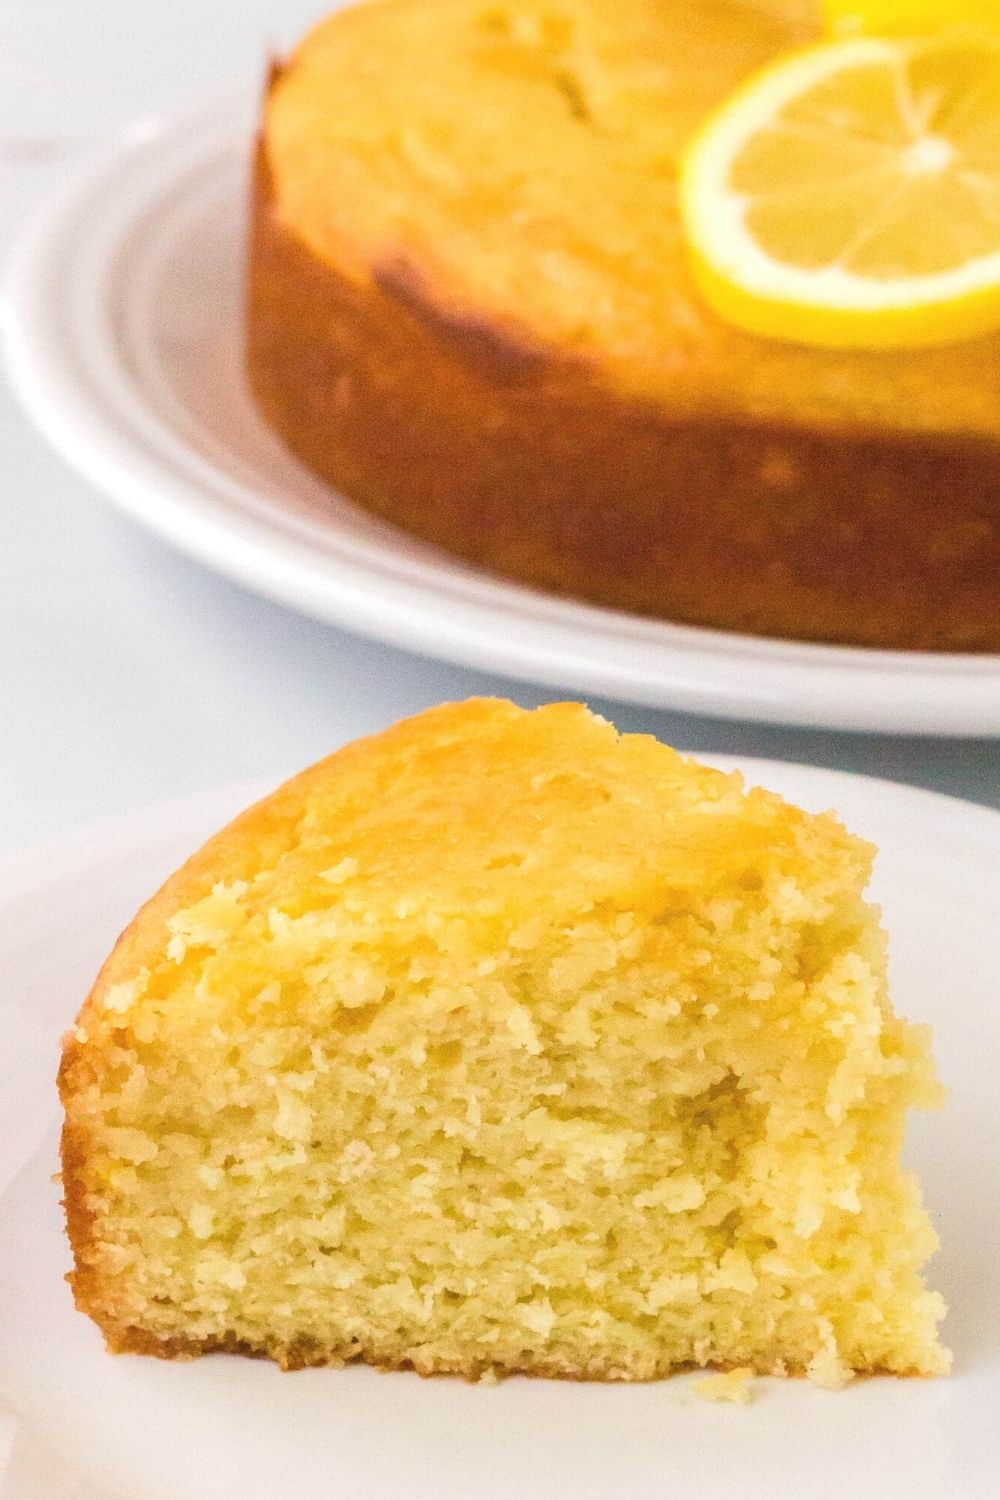 close-up view of a slice of lemon drizzle cake on a white plate, with the remaining syrup cake in the background.